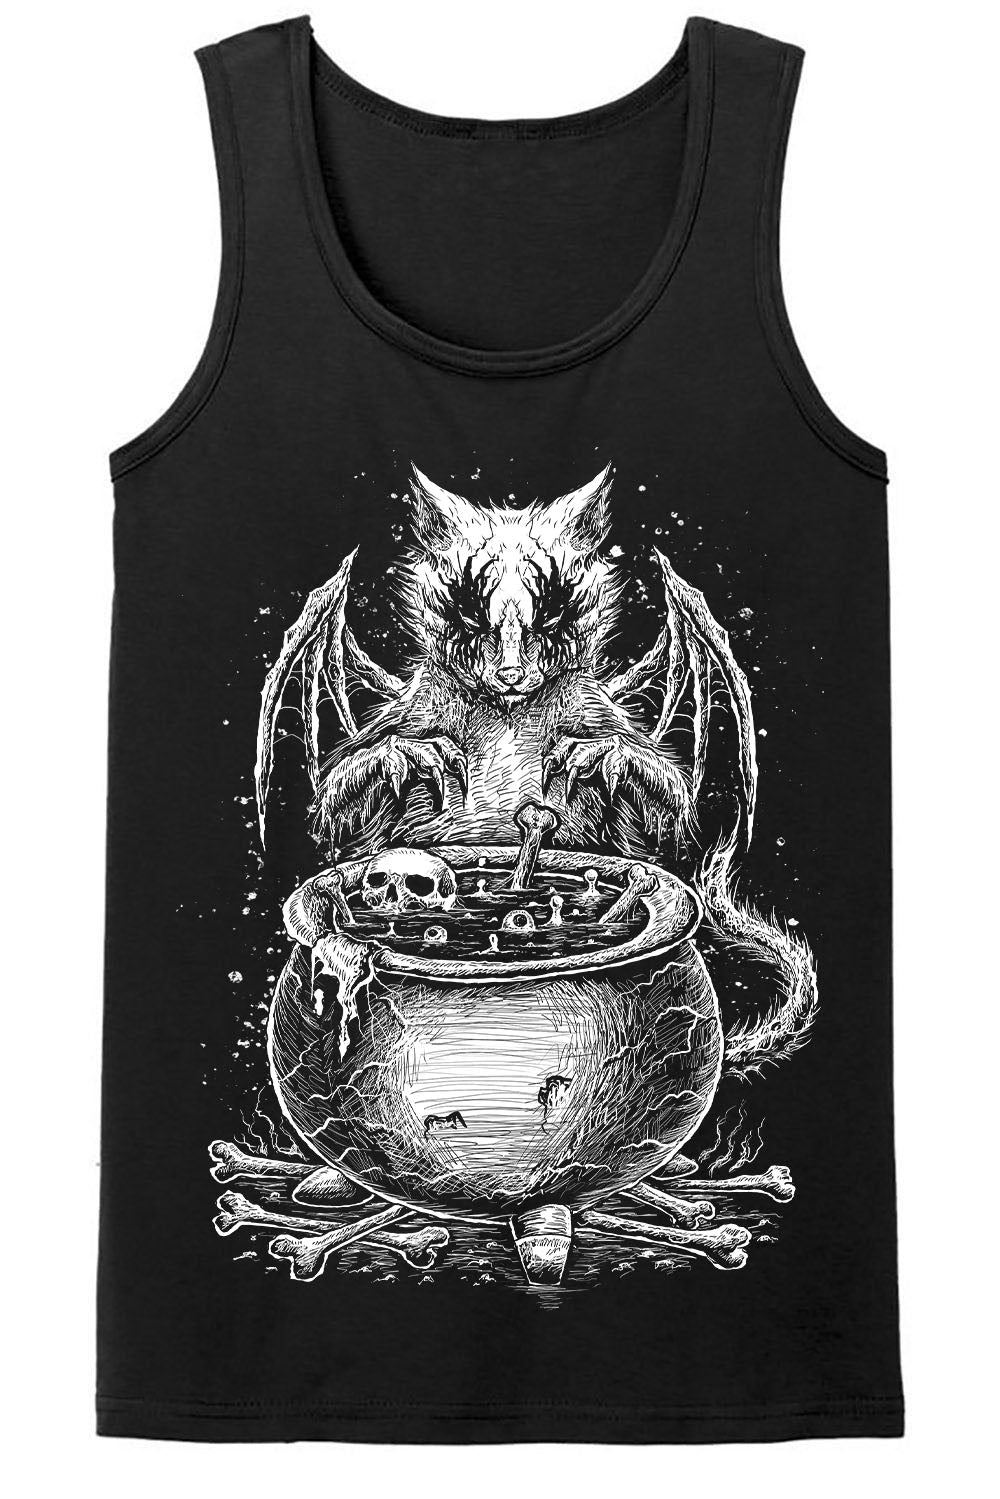 Conjuring Cat Tee [Multiple Styles Available]